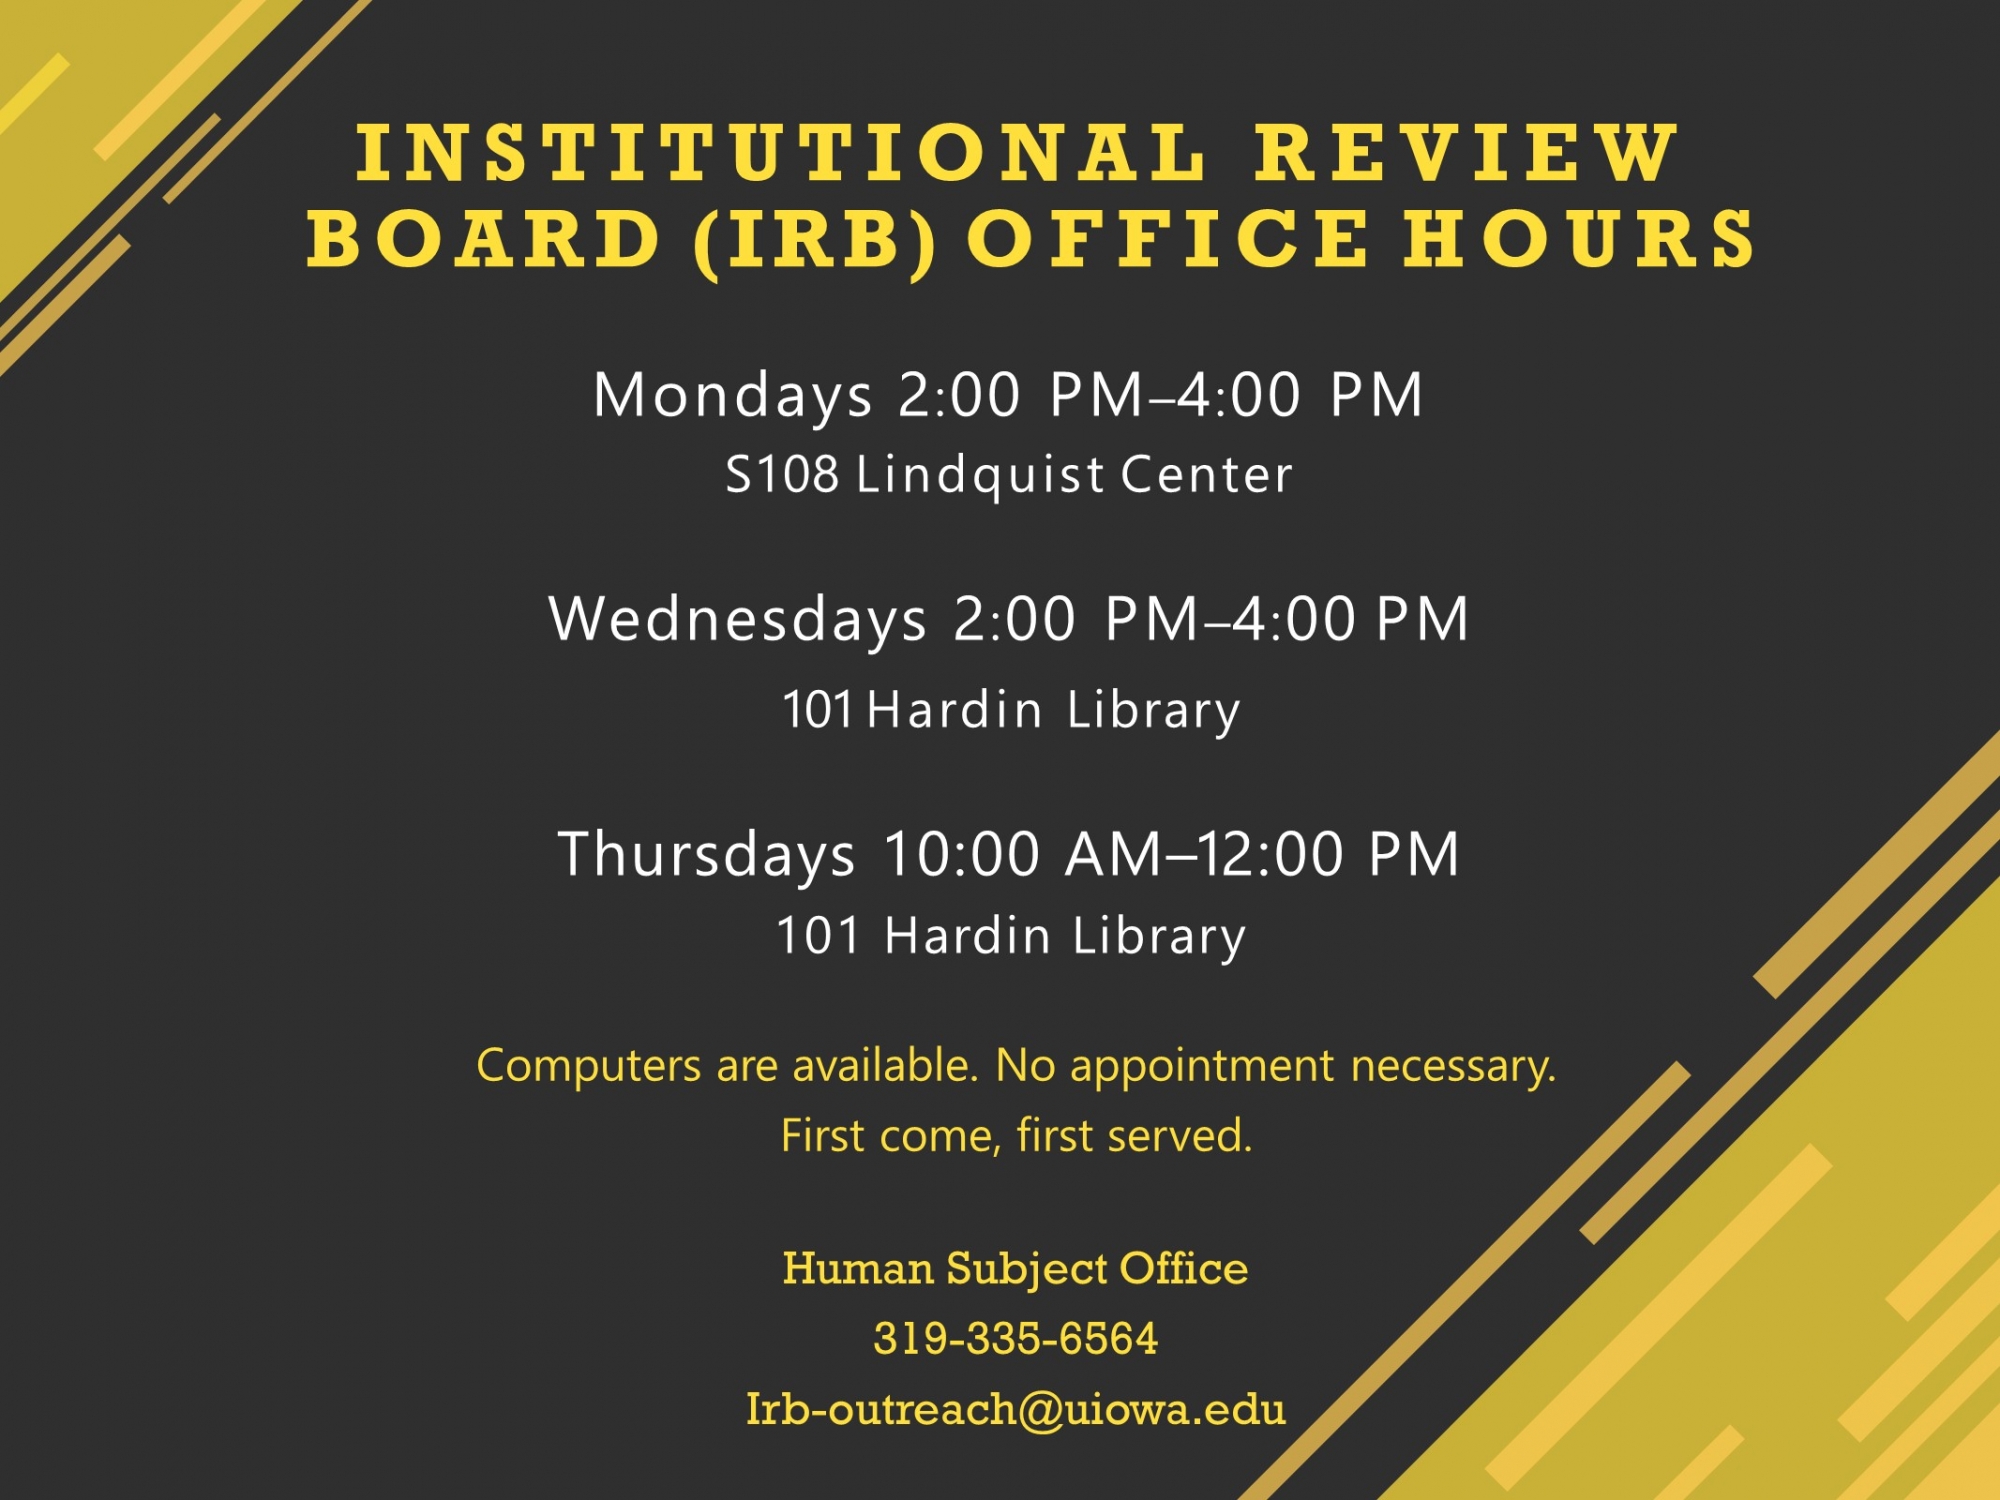 IRB office hours